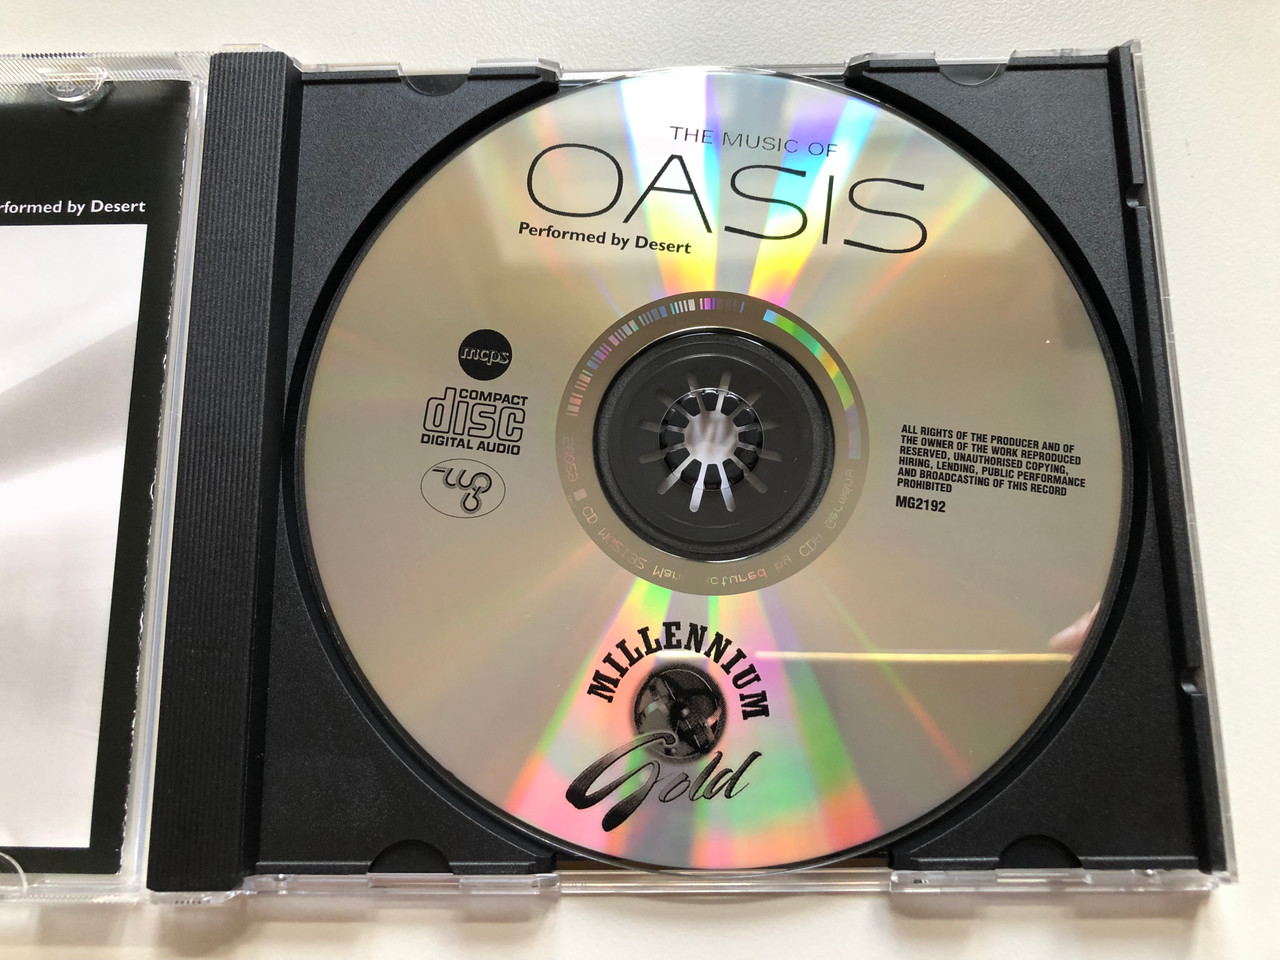 https://cdn10.bigcommerce.com/s-62bdpkt7pb/products/0/images/242718/The_Music_Of_Oasis_-_Performed_By_Desert_Let_There_Be_Love_Wonderwall_Be_Here_Now_Dyou_Know_What_I_Mean_Lyla_Millenium_Gold_Audio_CD_2006_MG2192_3__39557.1658823059.1280.1280.JPG?c=2&_gl=1*1ouqc2y*_ga*MjA2NTIxMjE2MC4xNTkwNTEyNTMy*_ga_WS2VZYPC6G*MTY1ODgxMTM2Mi40OTcuMS4xNjU4ODIyODcyLjM4